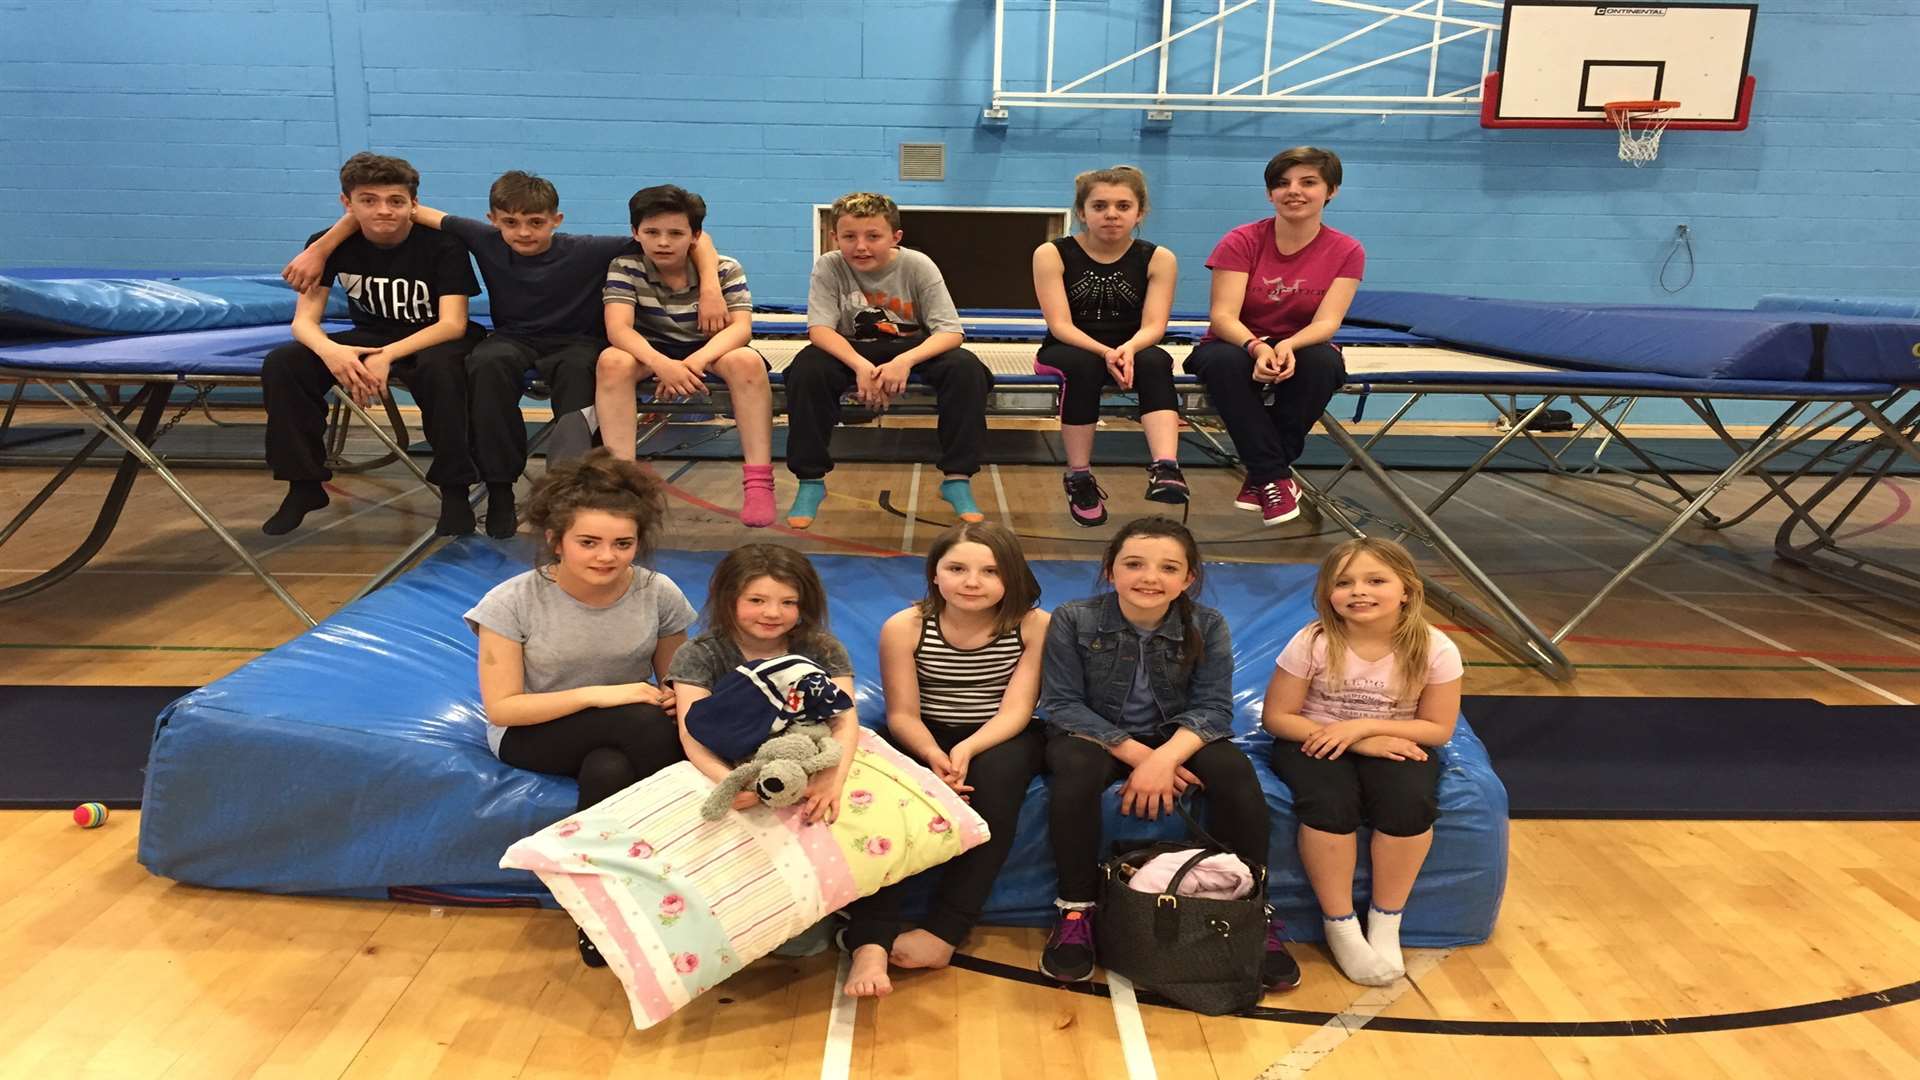 Members of Bounce who took part in the trampolining marathon